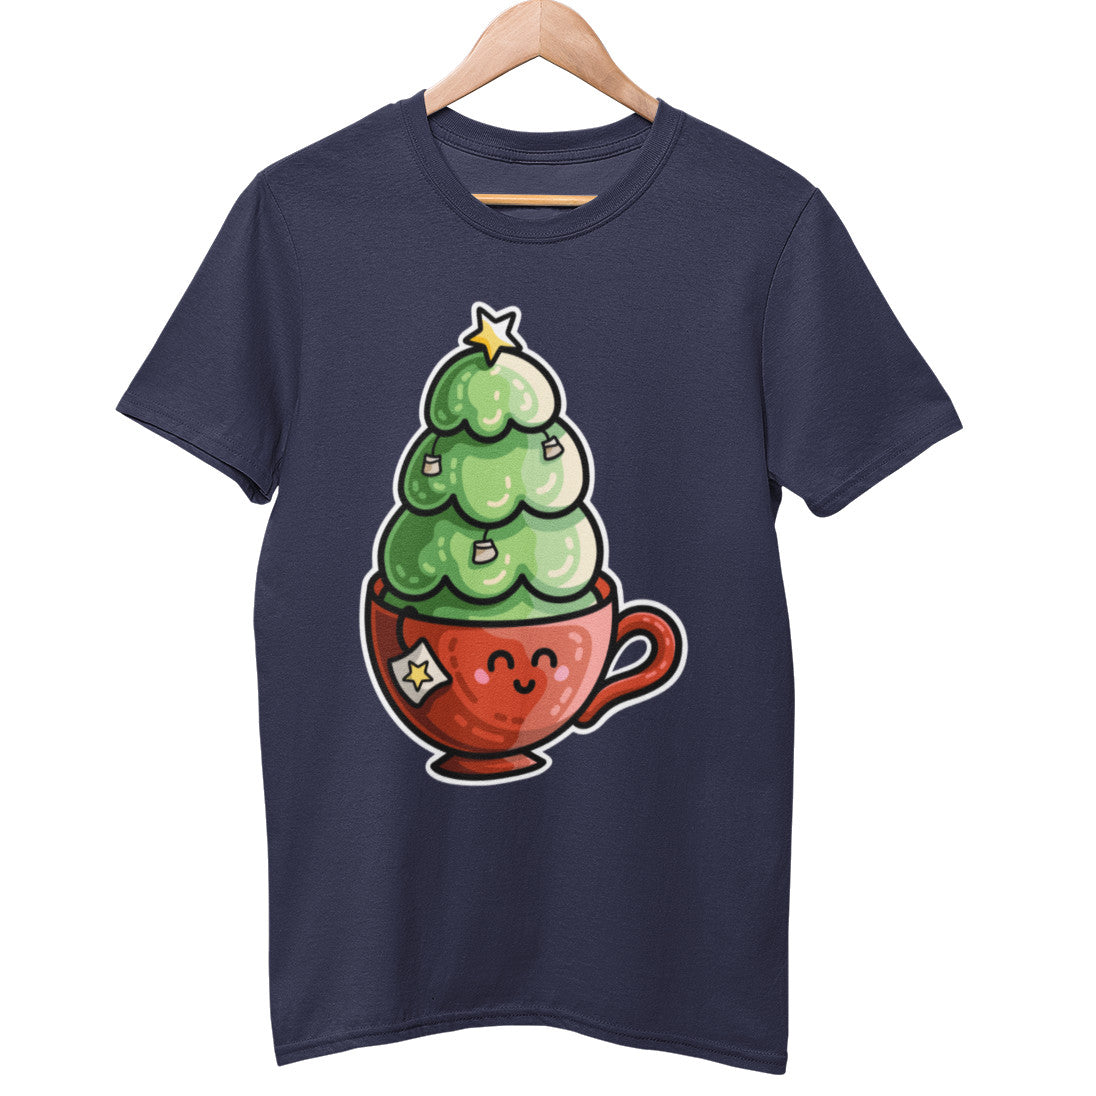 A navy colour unisex crewneck t-shirt on a wooden hanger with a design on its chest of a kawaii cute style red tea cup with a Christmas tree planted in it with teabags decorating the tree instead of baubles